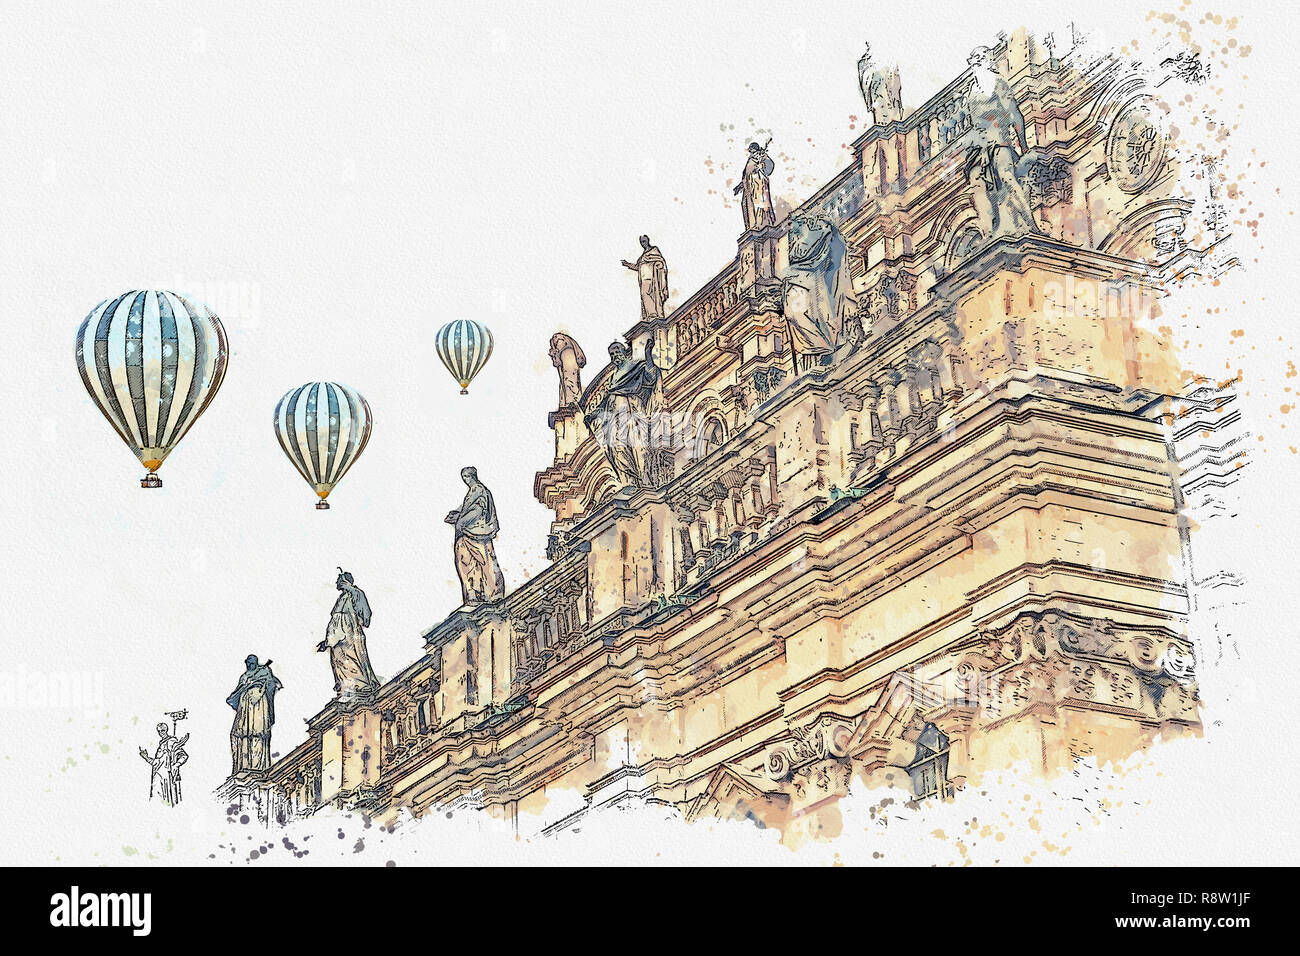 A watercolor sketch or illustration. Sculptures on the roof of an old building from the complex of the Royal Palace in Dresden, built in the 16th cent Stock Photo